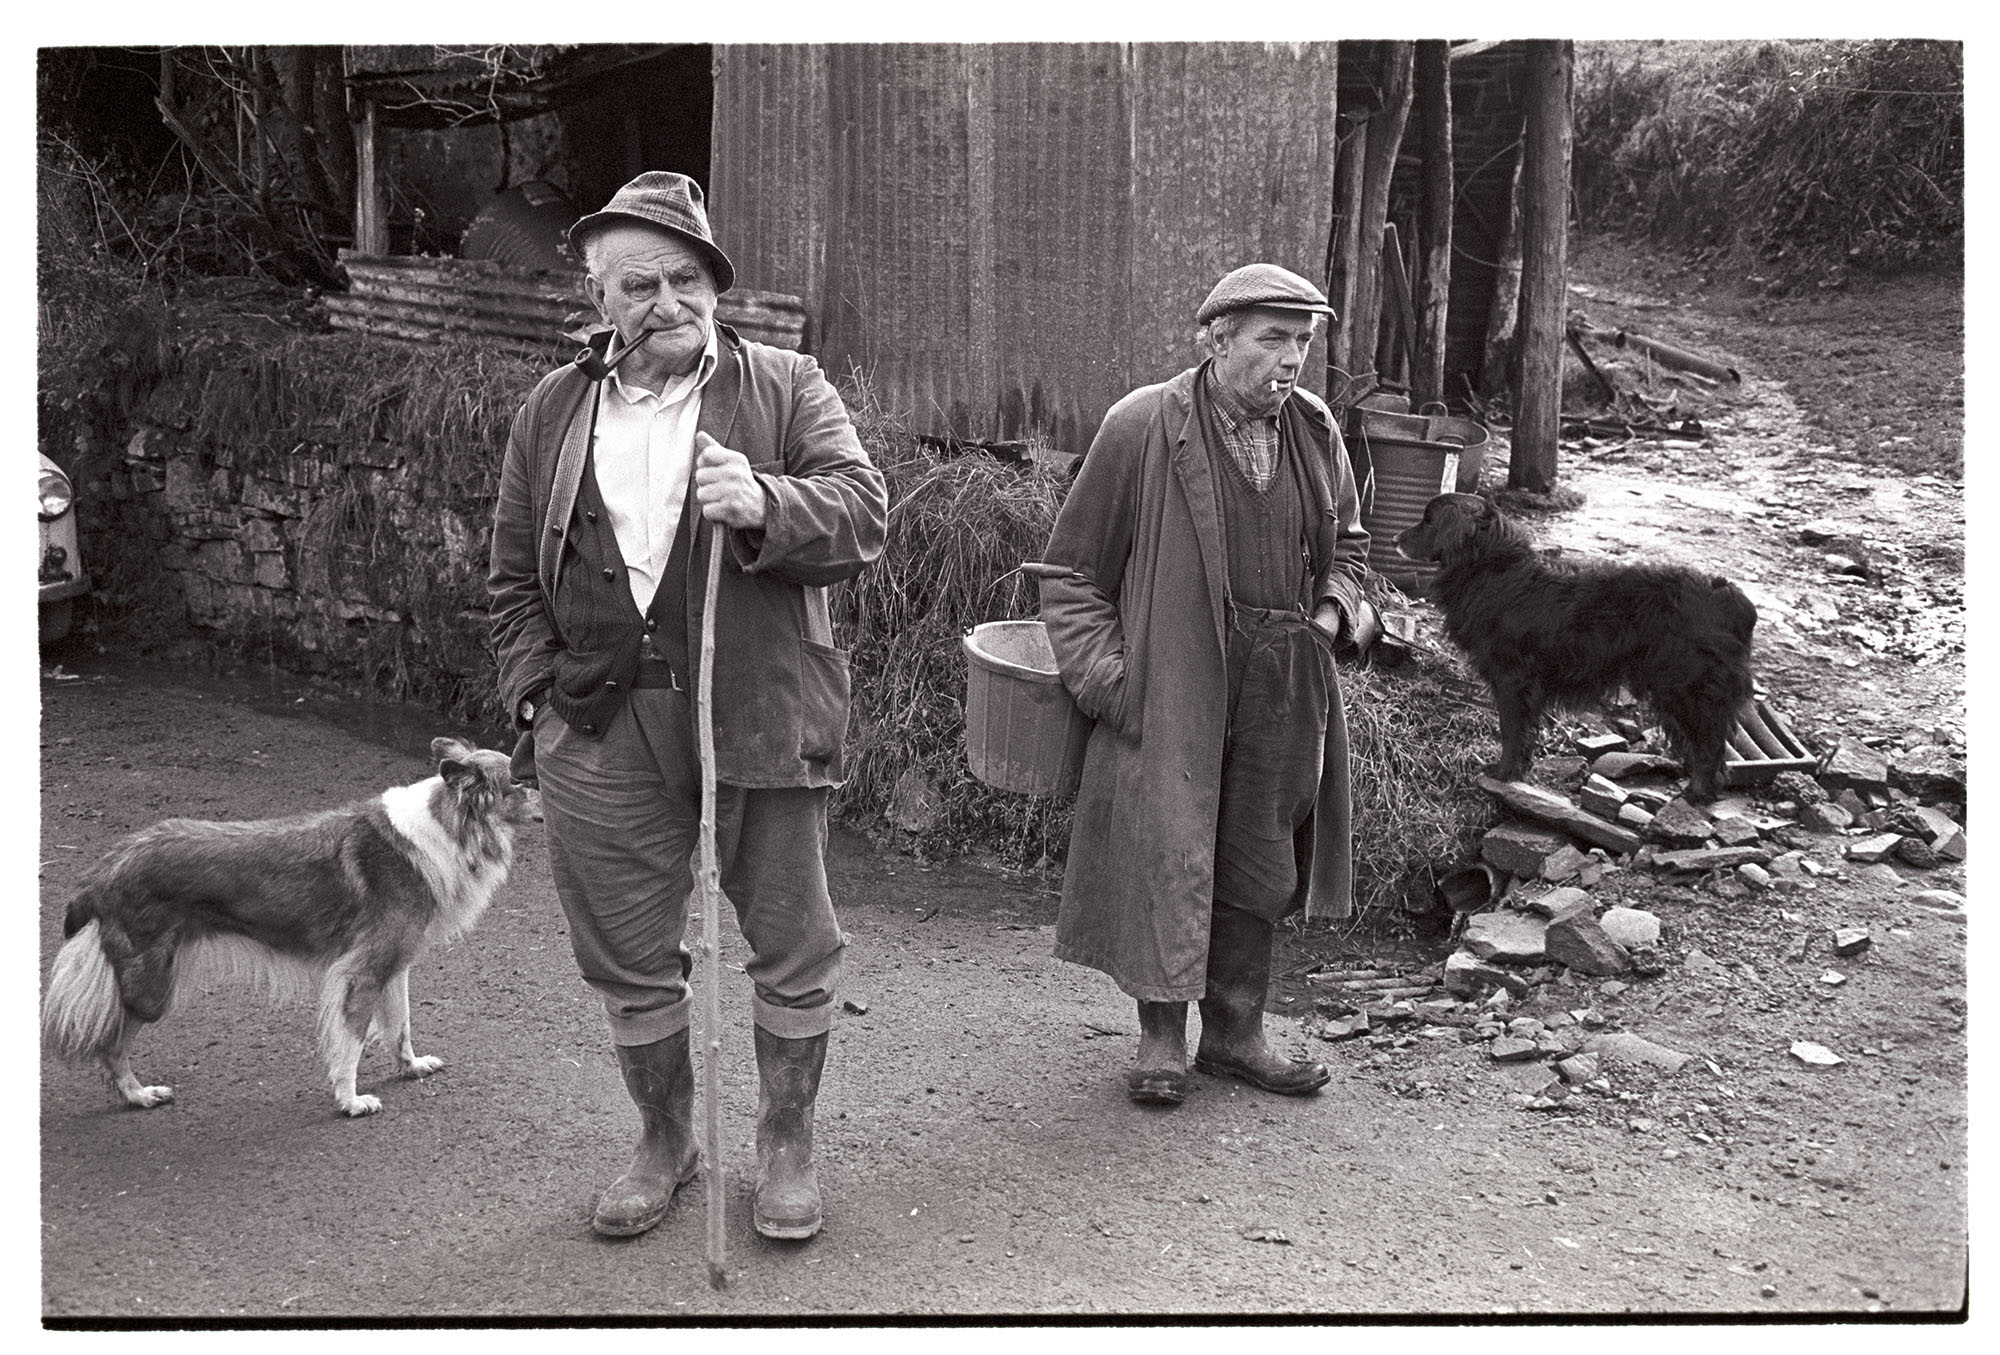 Two men standing in front shed with dogs.
[Archie Parkhouse and Ivor Brock standing in front of a corrugated iron shed at Millhams, Dolton. They are accompanied by two dogs, one of which, named Sally, has three legs. Archie is smoking a pipe and carrying a staff. Ivor is smoking a cigarette and carrying a bucket.]